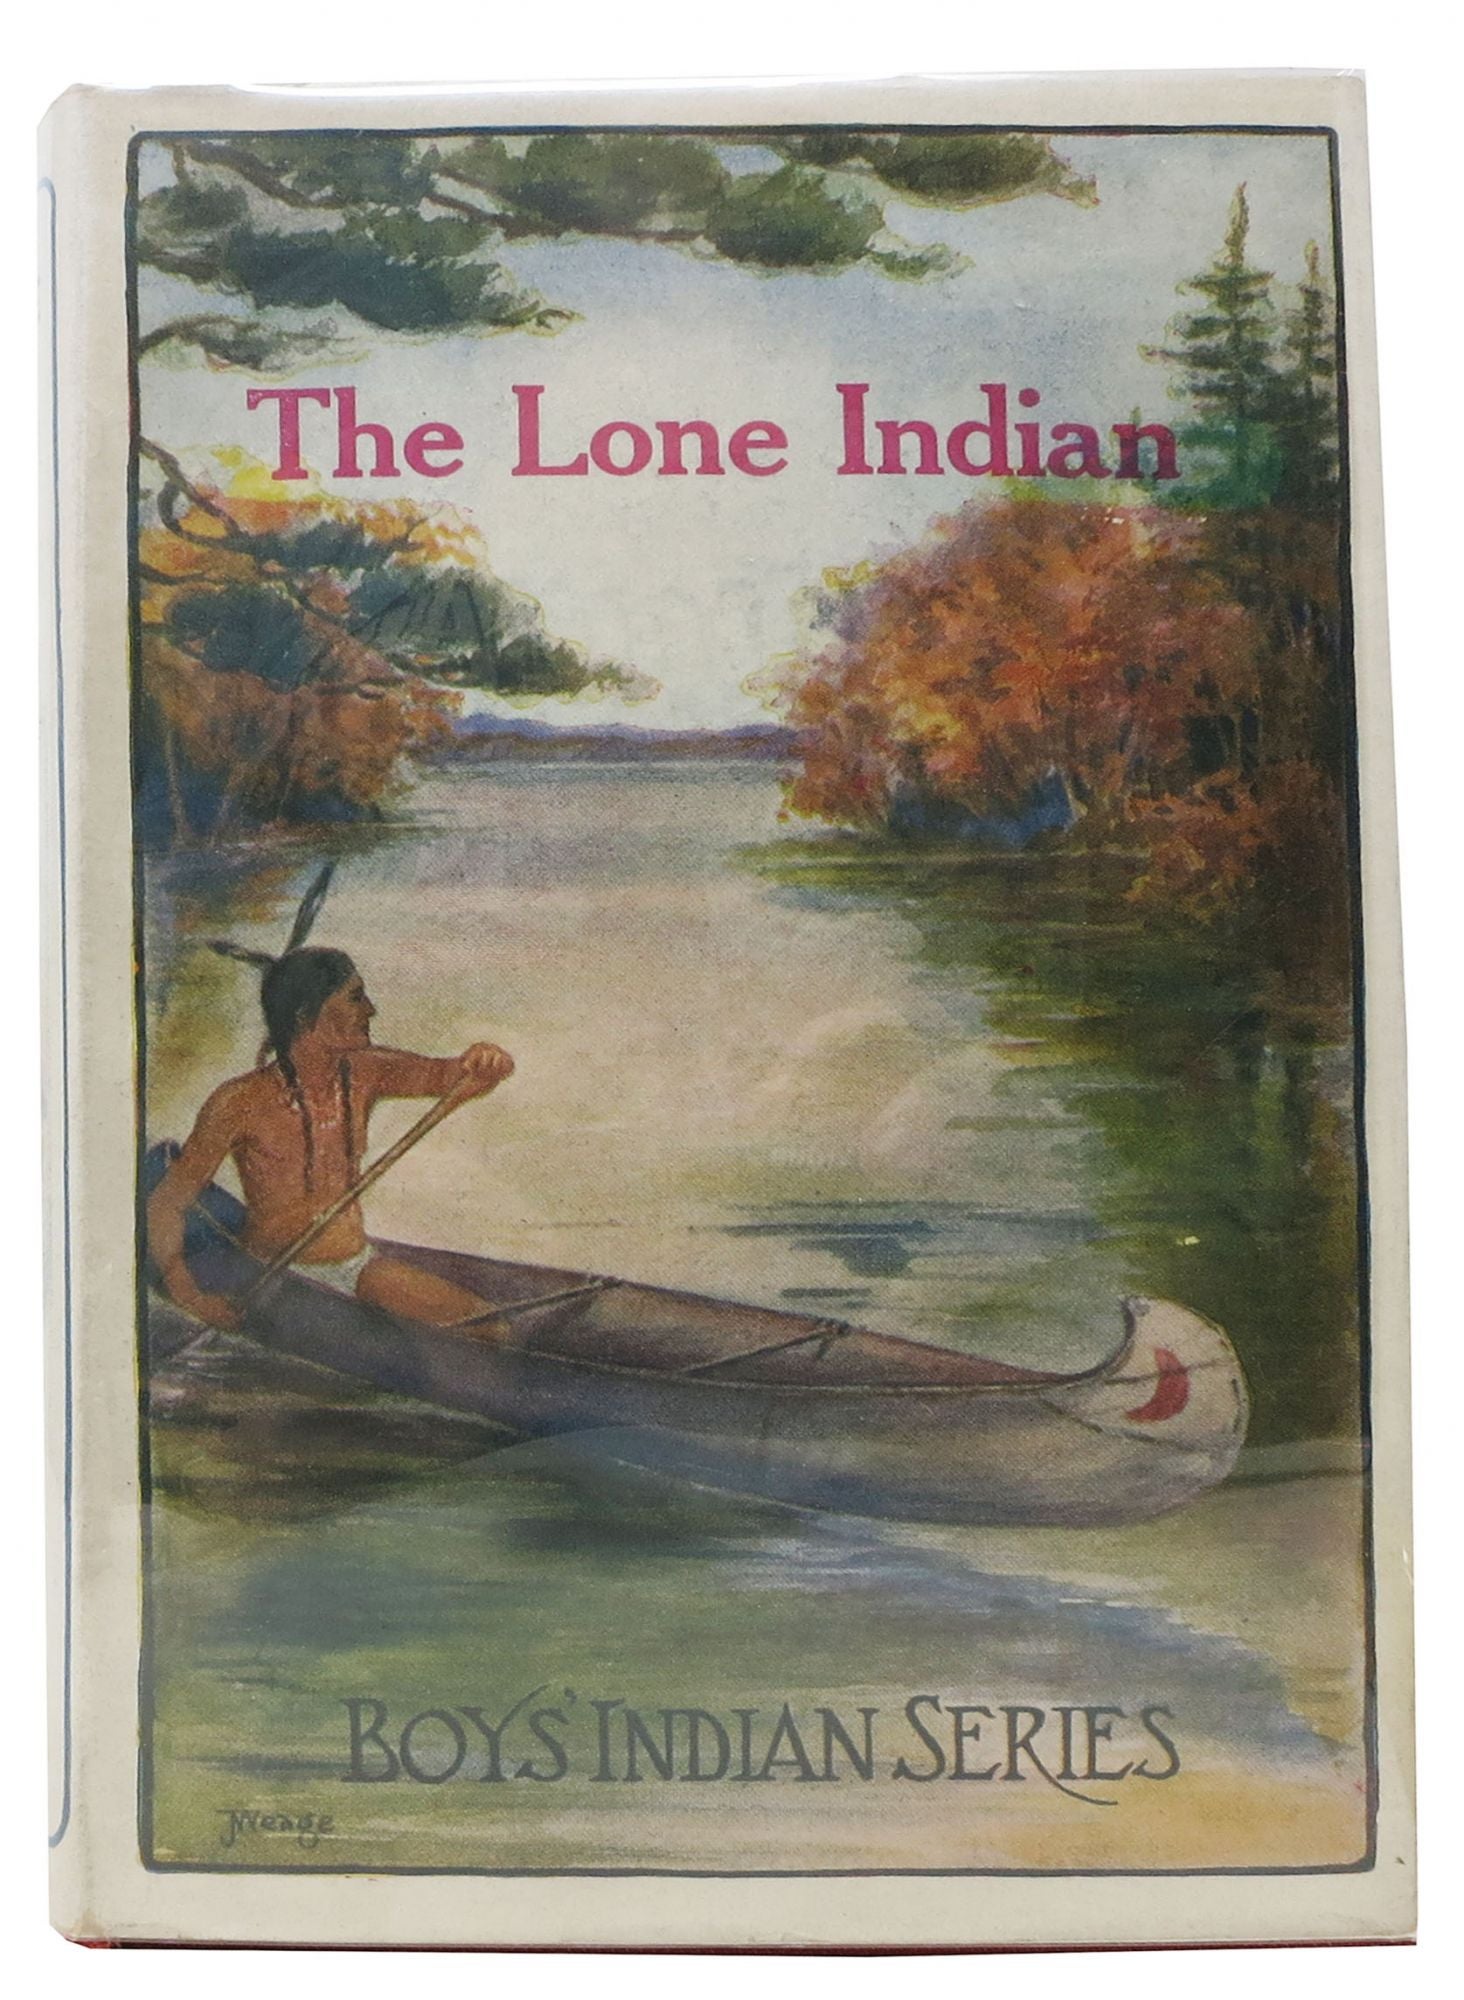 Braden, James A. - The LONE INDIAN. Boys' Indian Series #3